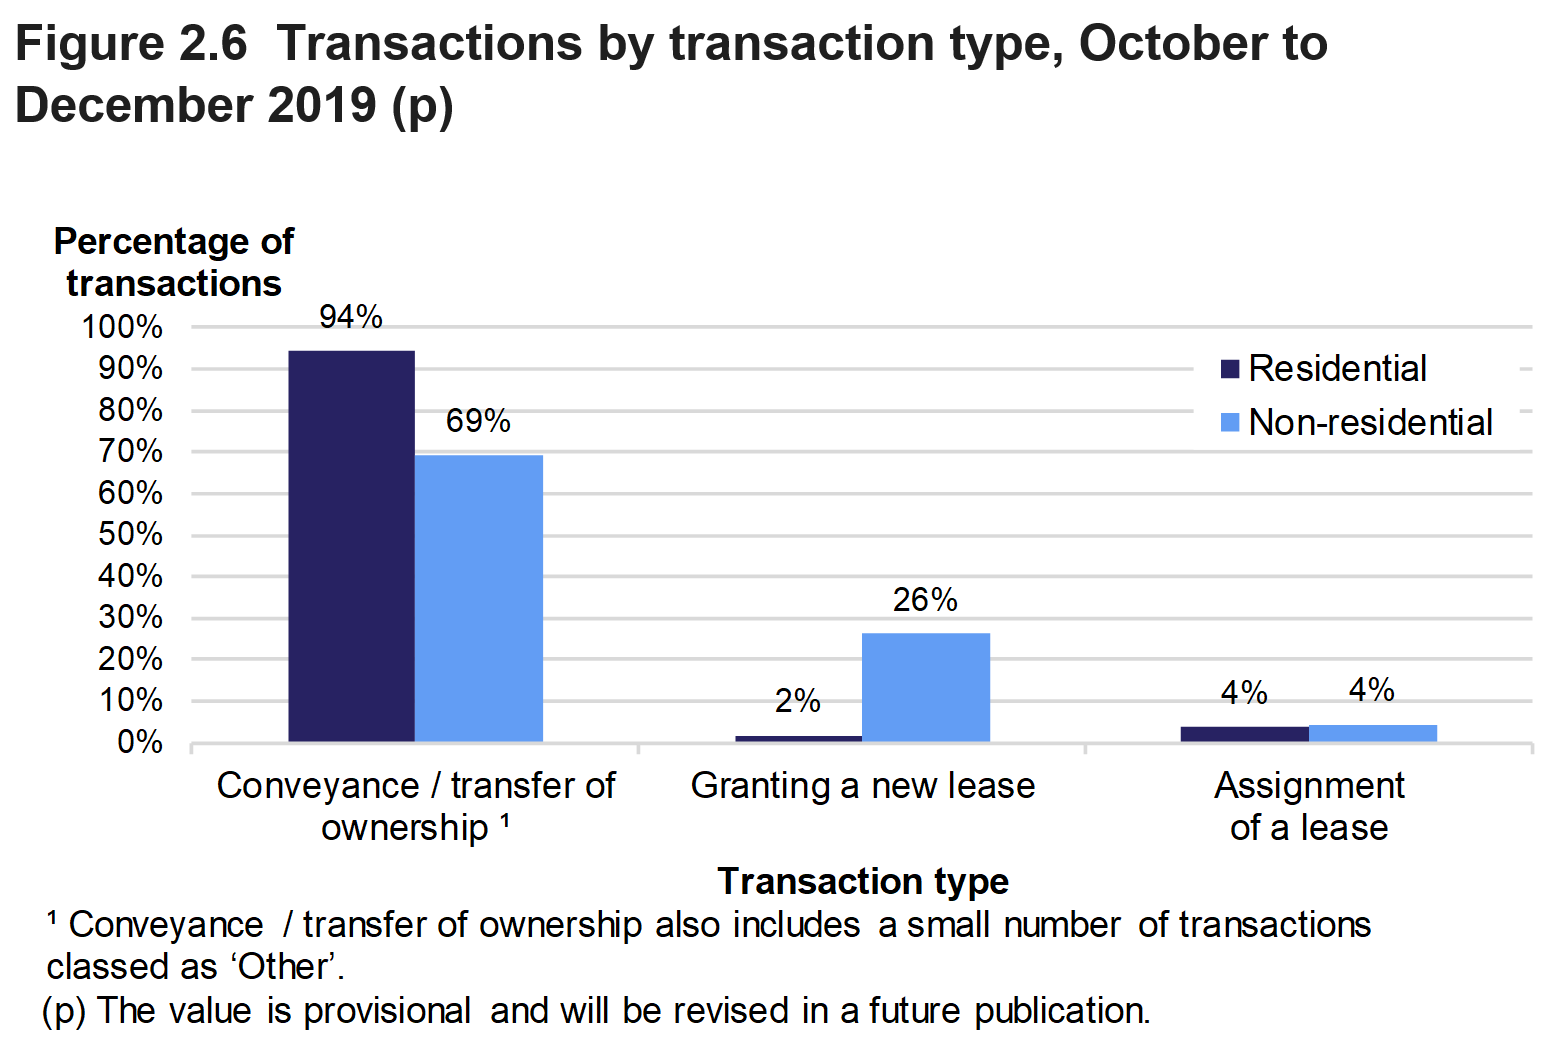 Figure 2.6 shows the percentage of transactions involving conveyance / transfer of ownership, granting of a new lease or assignment of a lease, for October to December 2019. Separate percentages are given for residential and non-residential transactions.